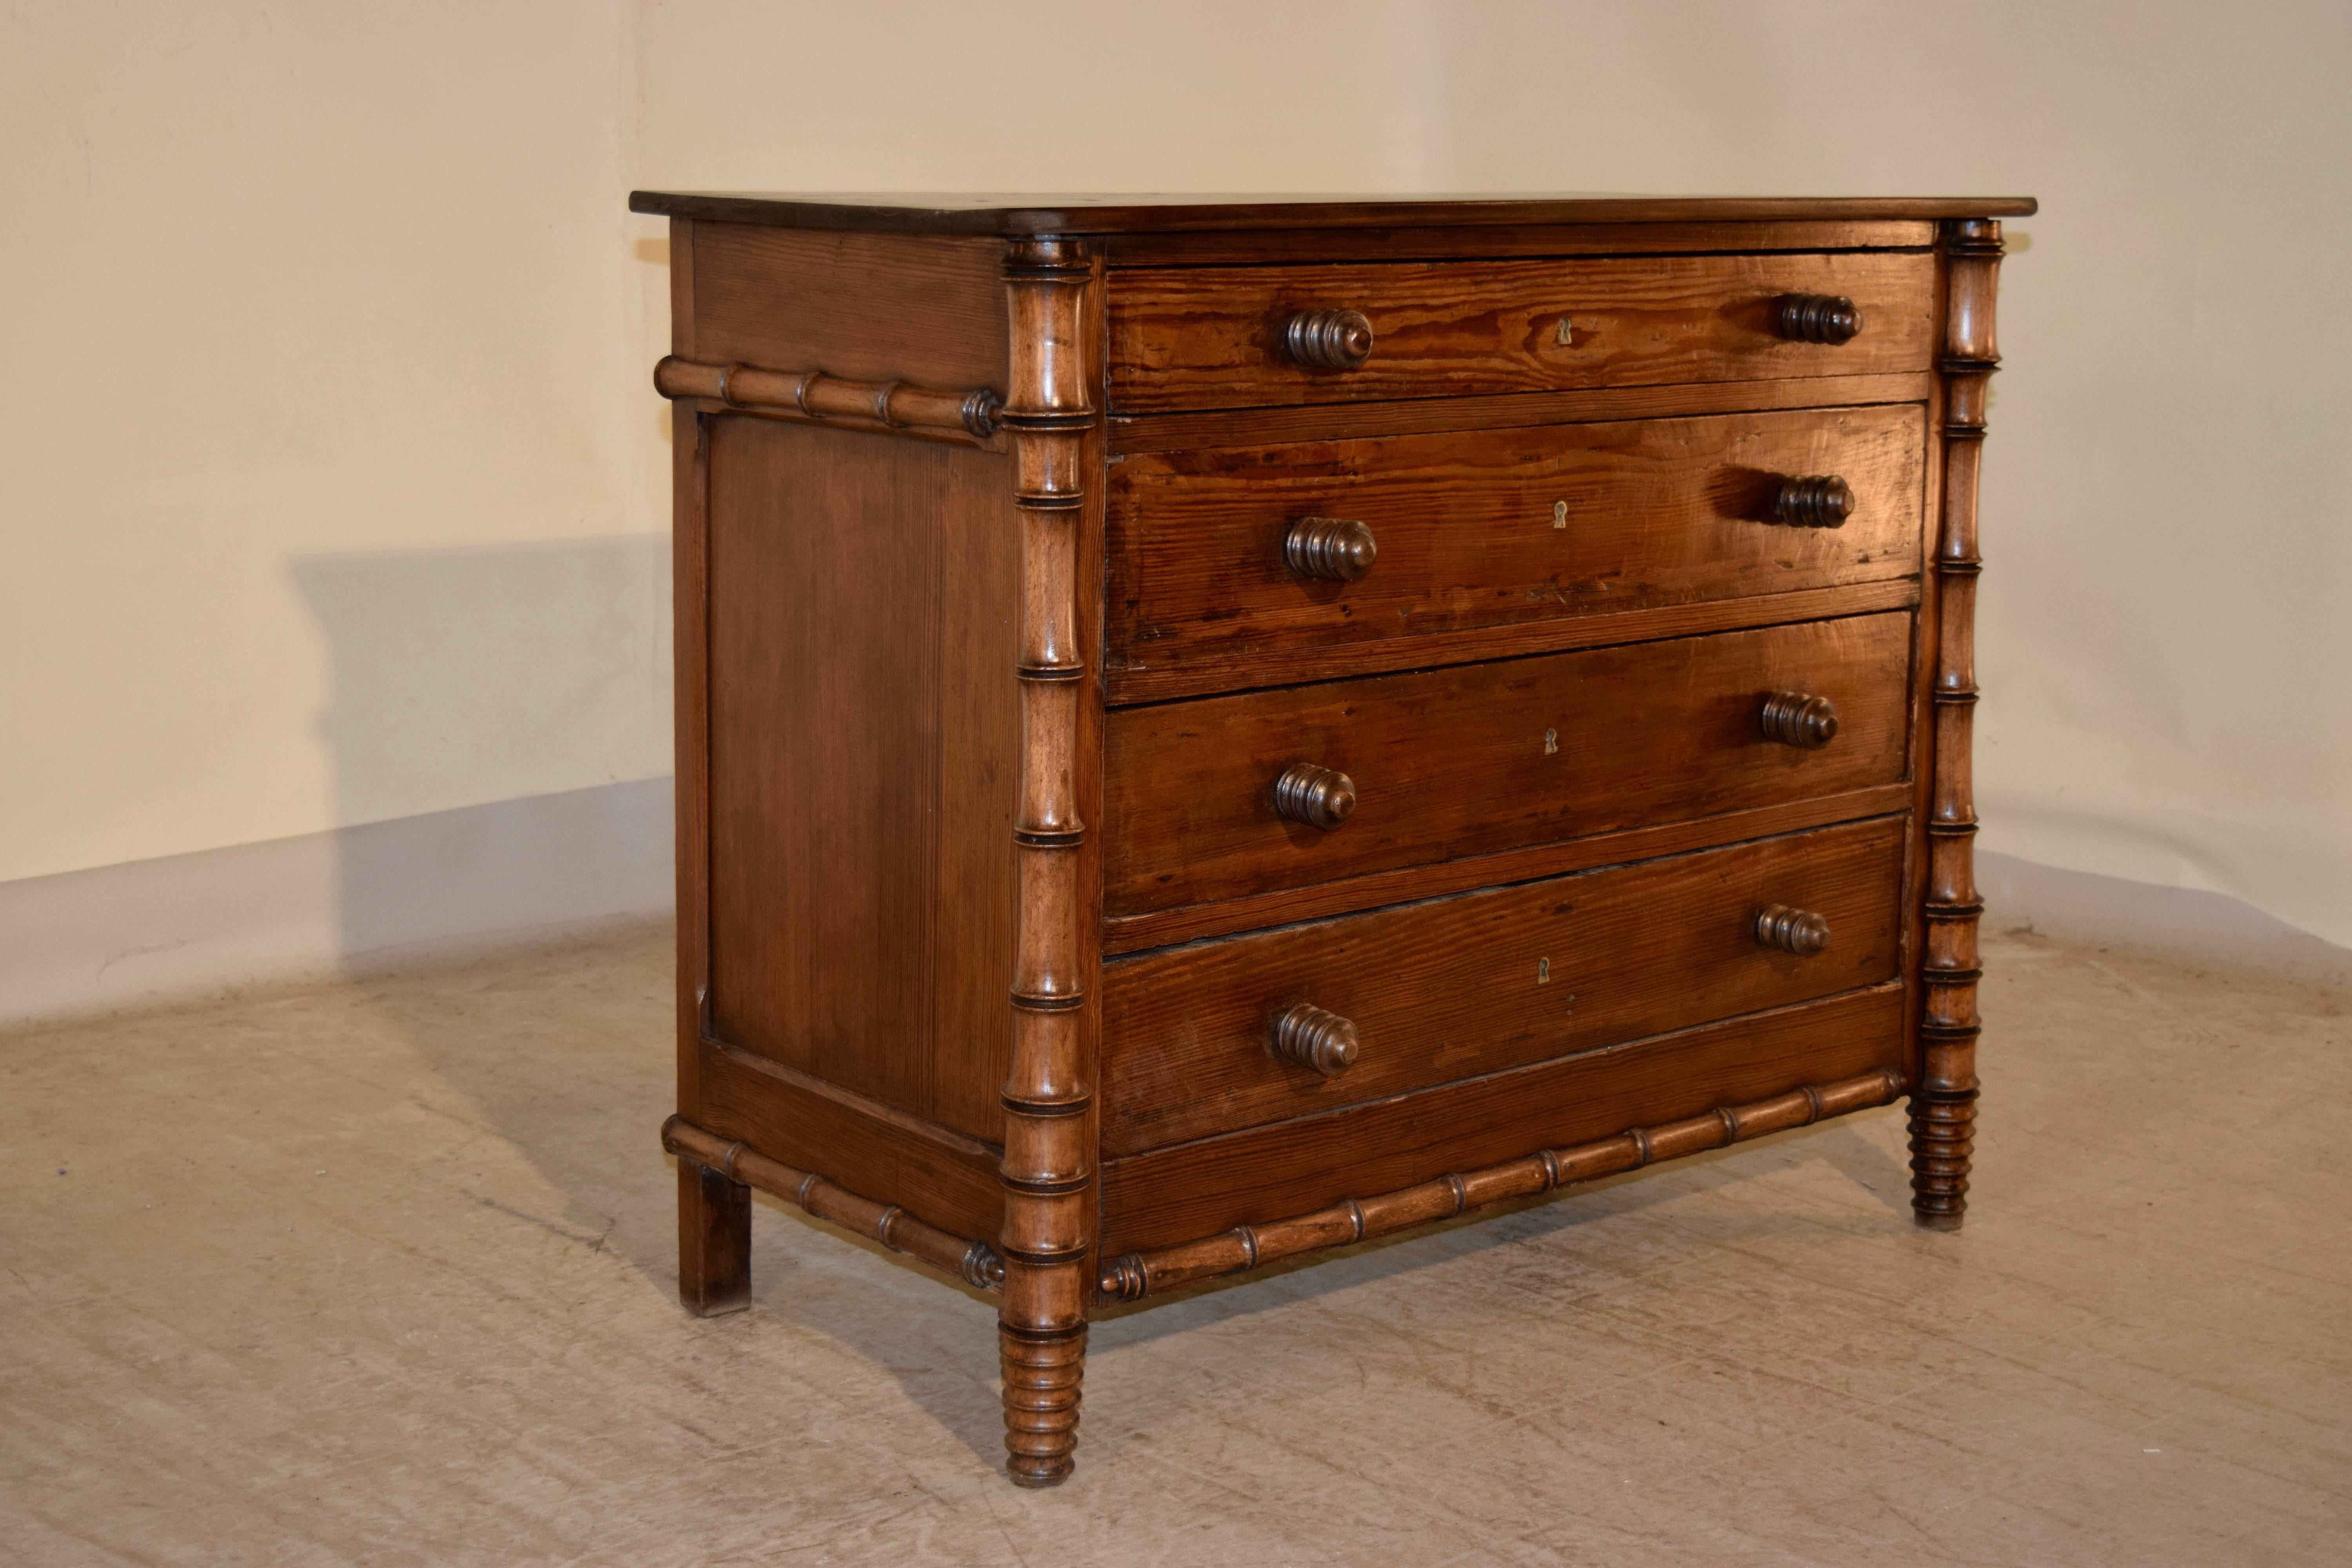 19th century chest of drawers from France with a pine top, following down to four drawers in the front and paneled sides which are banded with faux bamboo molding and corner columns. The drawer knobs are hand-turned in the same pattern to match.